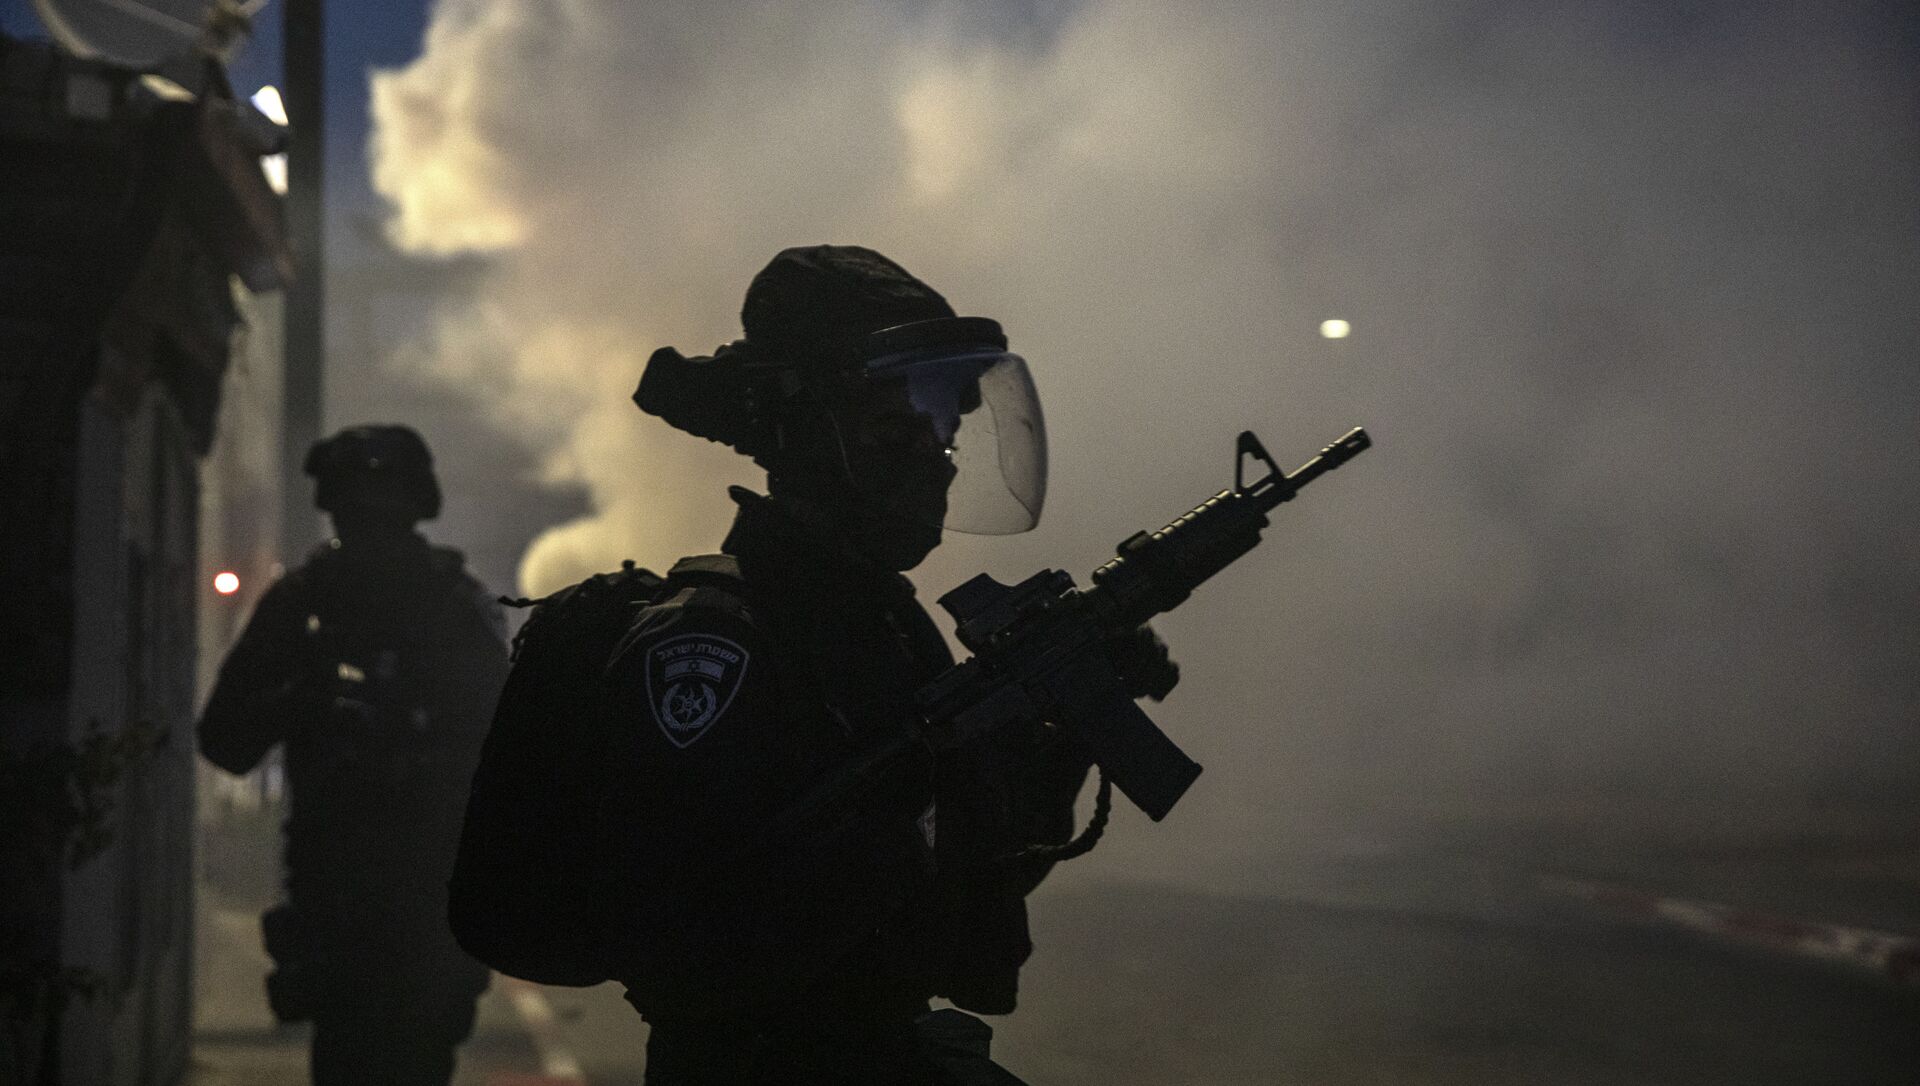 Israeli forces run during clashes with Israeli Arabs in the Israeli mixed city of Lod, Israel, Tuesday, May 11,2021. - Sputnik Afrique, 1920, 12.05.2021